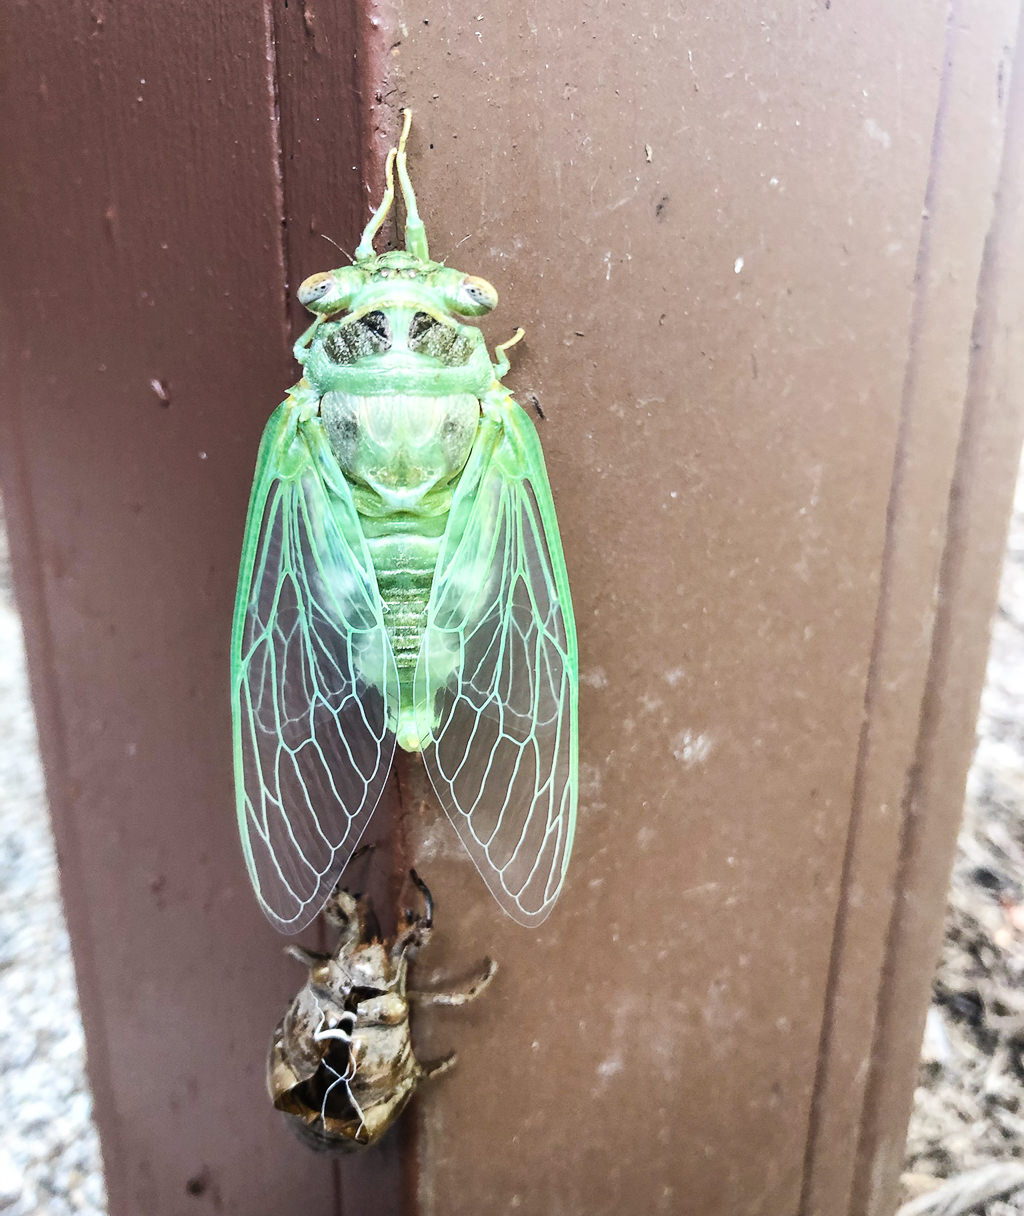 Annual cicada emerging from its shell